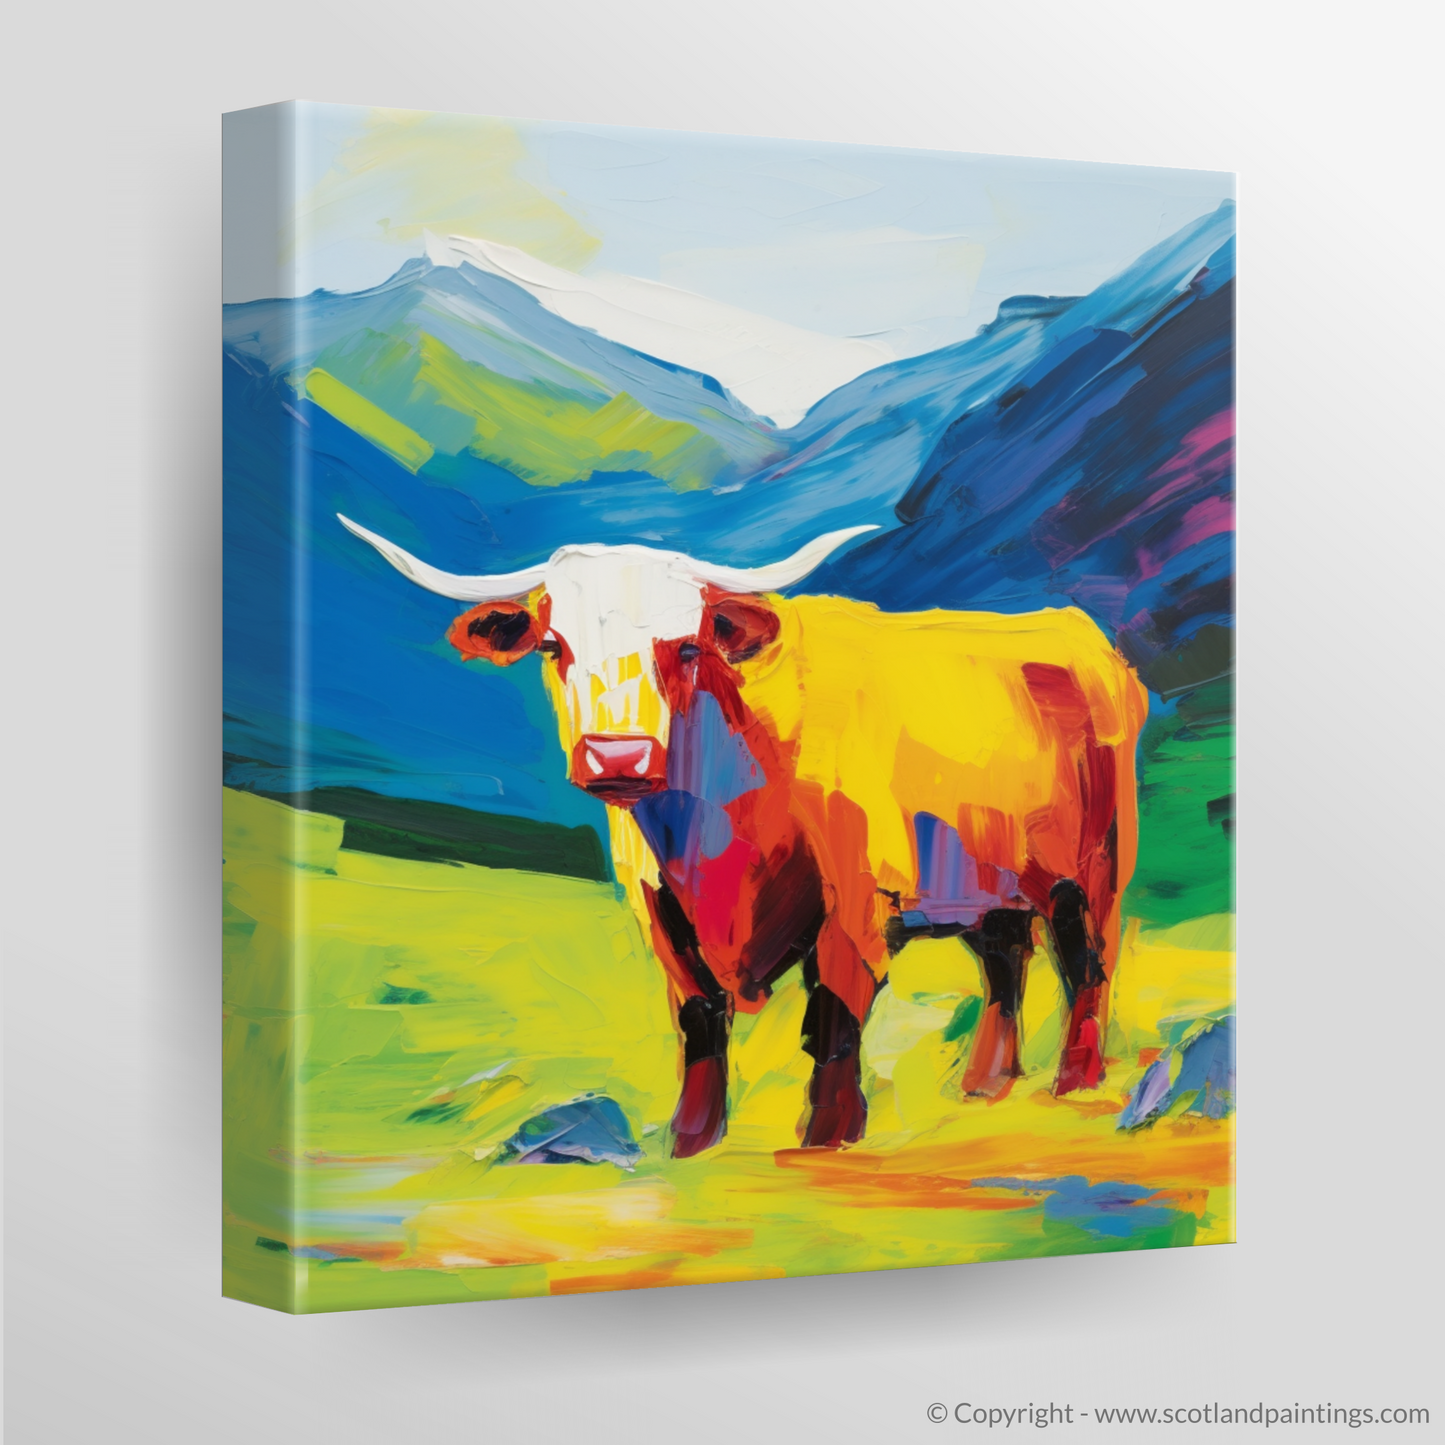 Highland Cow in Glencoe: A Summer's Abstraction